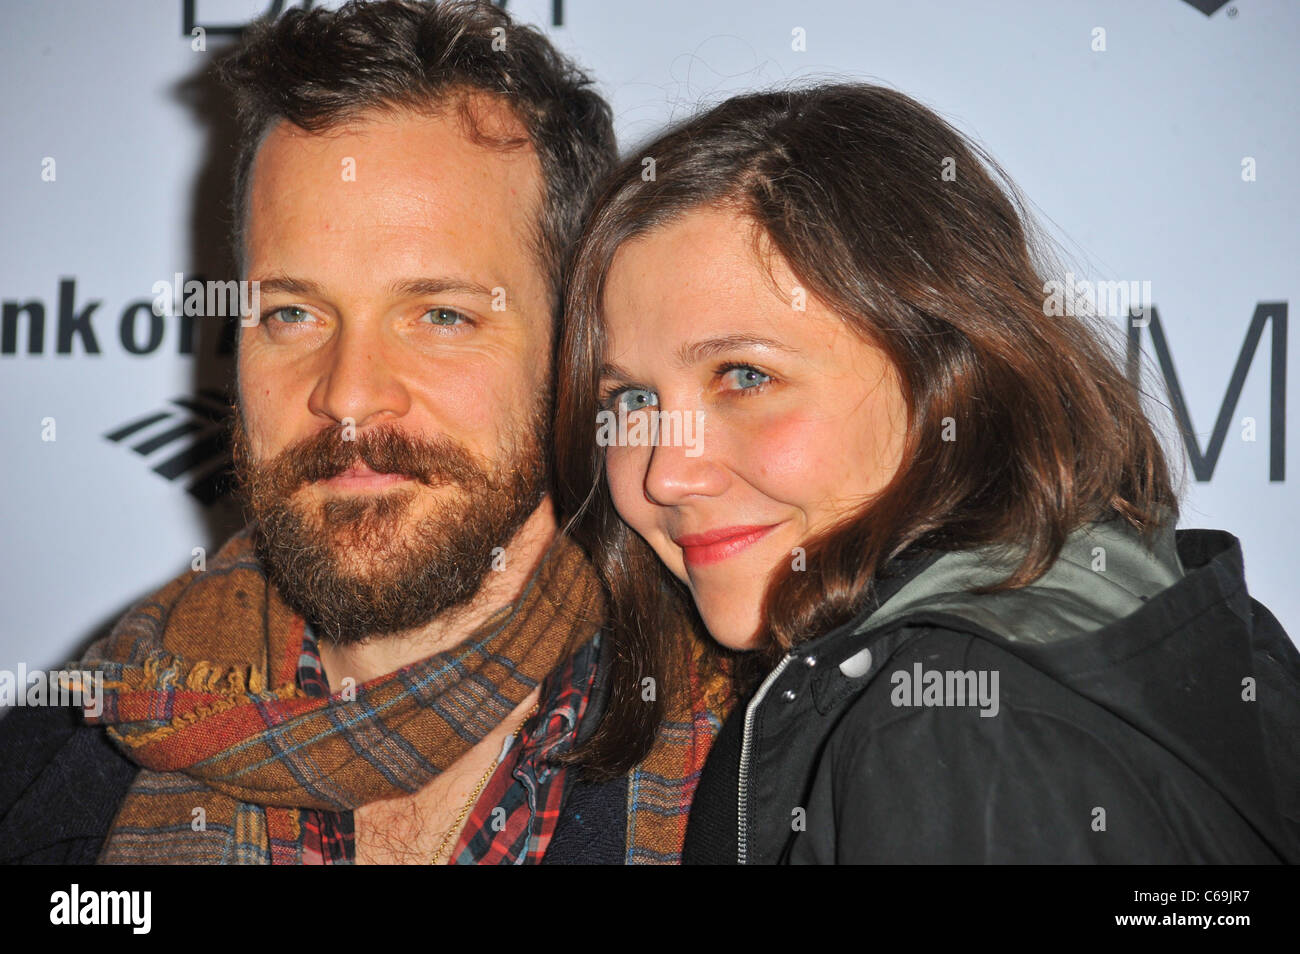 Peter Sarsgaard, Maggie Gyllenhaal in attendance for Brooklyn Academy of Music BAM 2011 Theater Gala Opening Night Performance of THE DIARY OF A MADMAN, Howard Gilman Opera House, Brooklyn, NY March 10, 2011. Photo By: Gregorio T. Binuya/Everett Collection Stock Photo